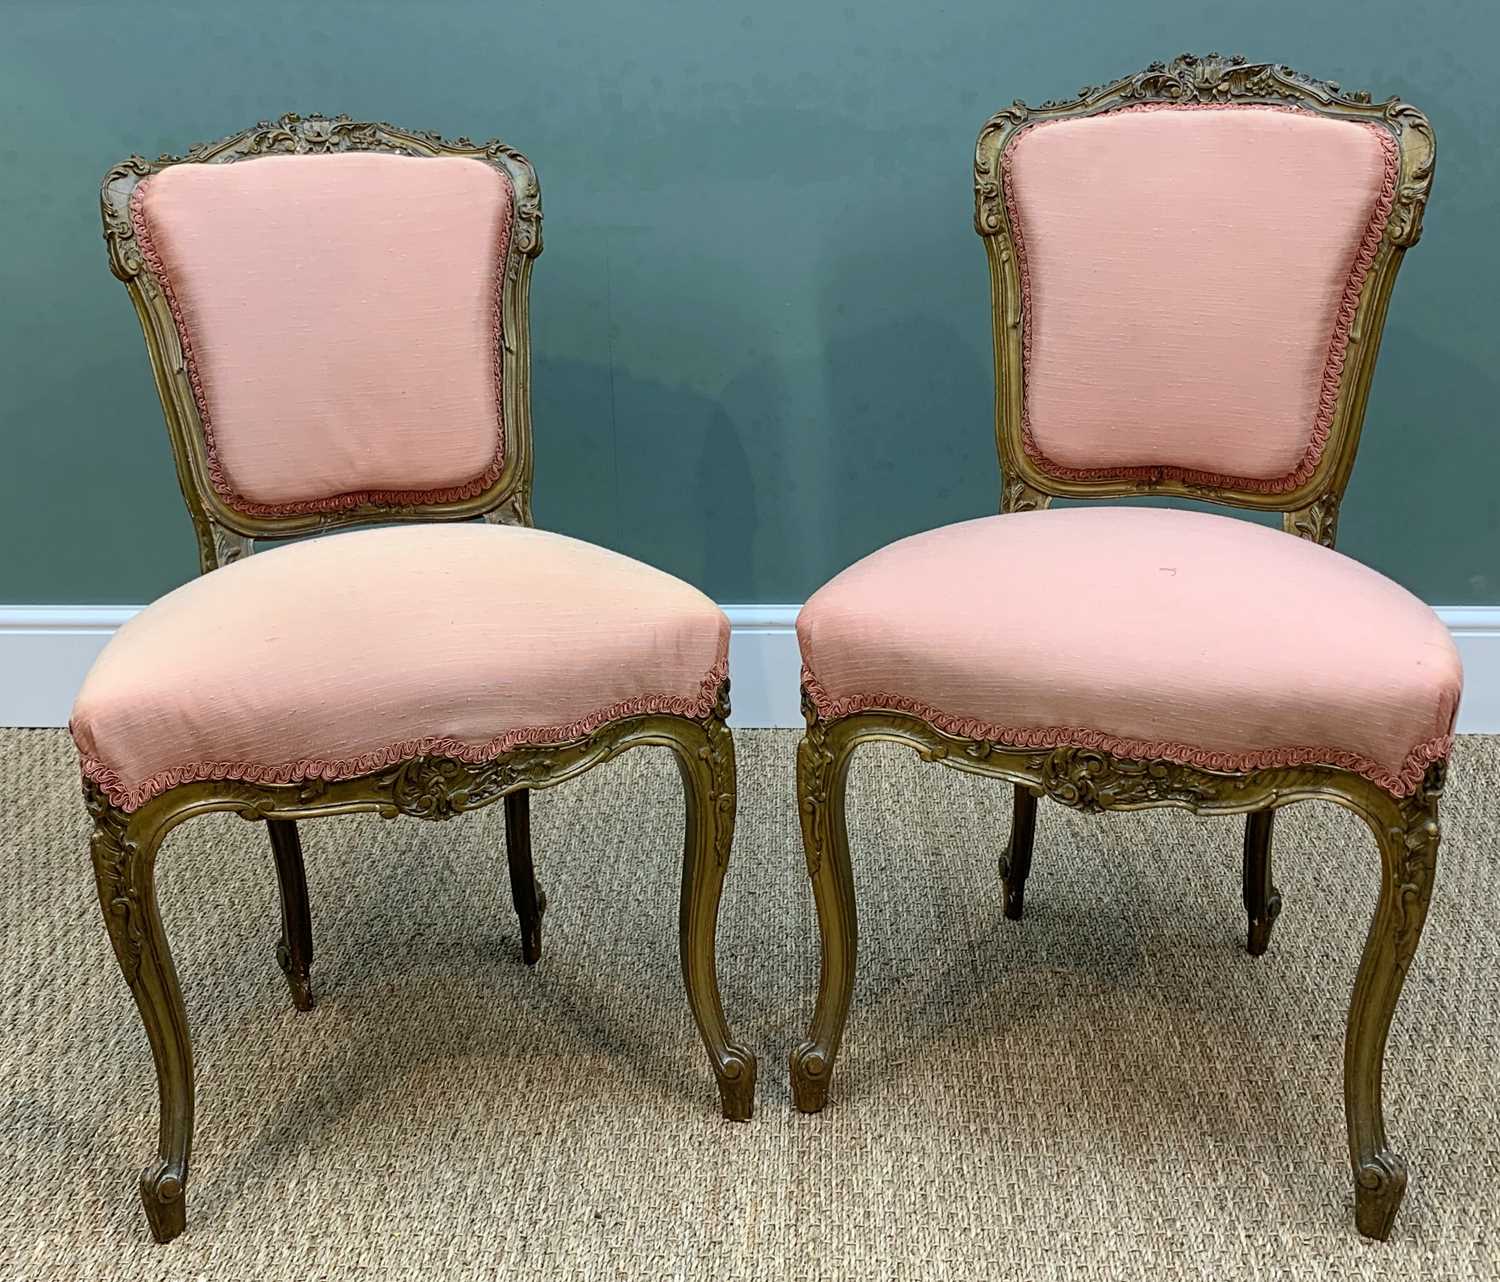 LOUIS XV-STYLE GILTWOOD SALON SUITE, comprising canape and pair of fauteuils, apricot damask - Image 7 of 7